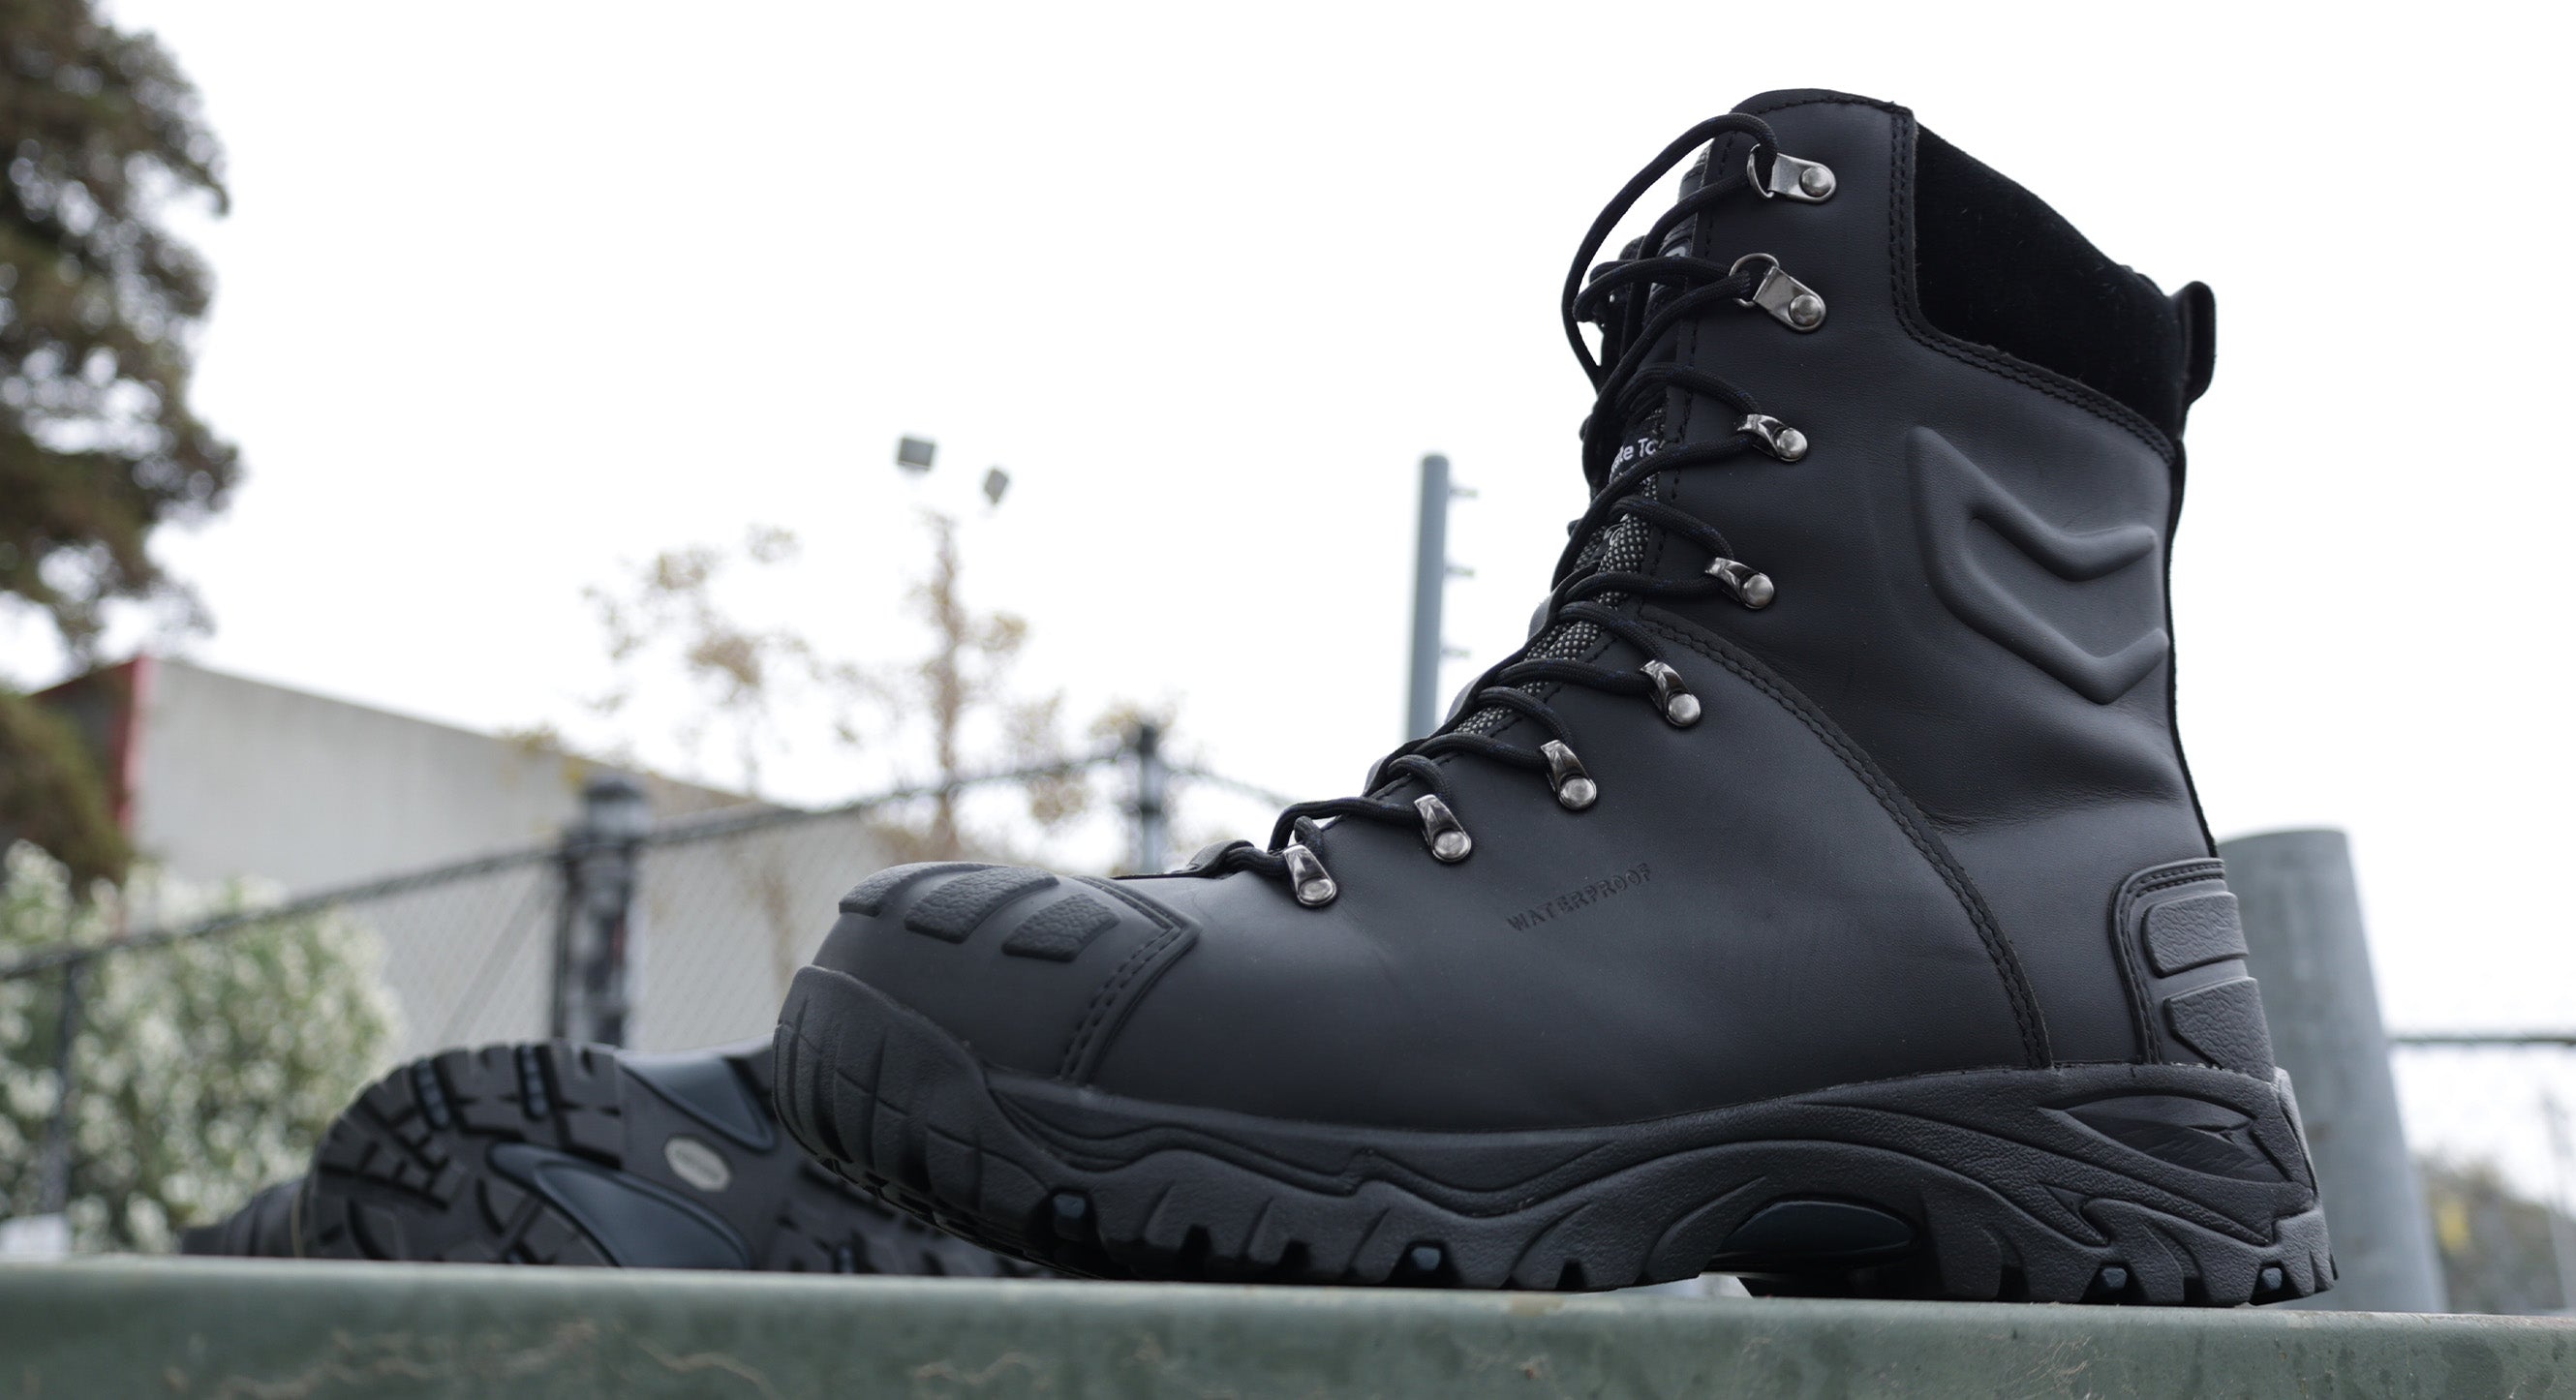 Epik Workwear - Insulated Footwear, Boots, Socks, and Shoes